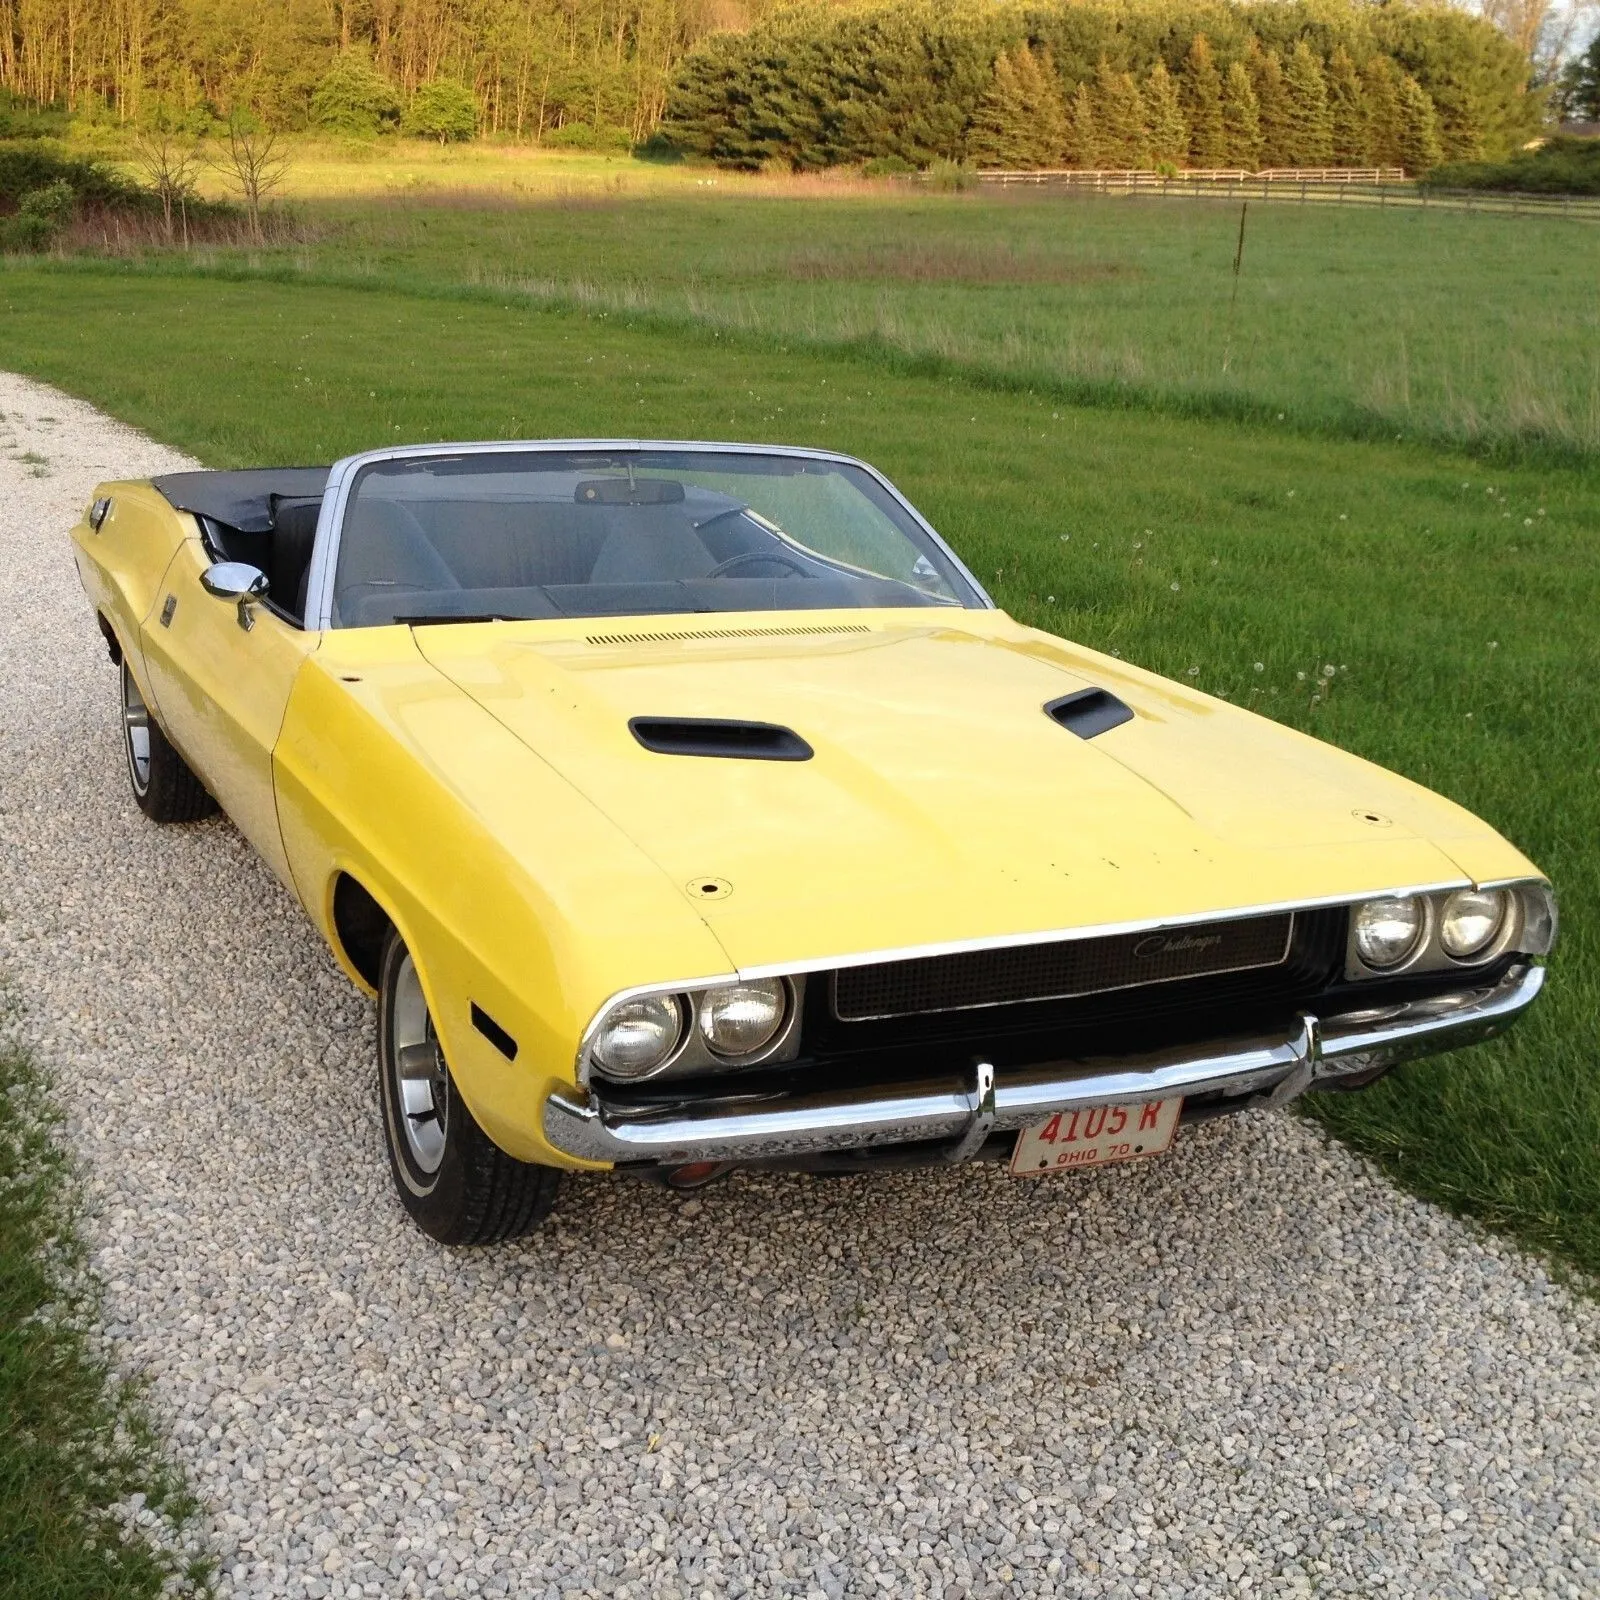 1970 Dodge Challenger Convertible project [pretty solid]